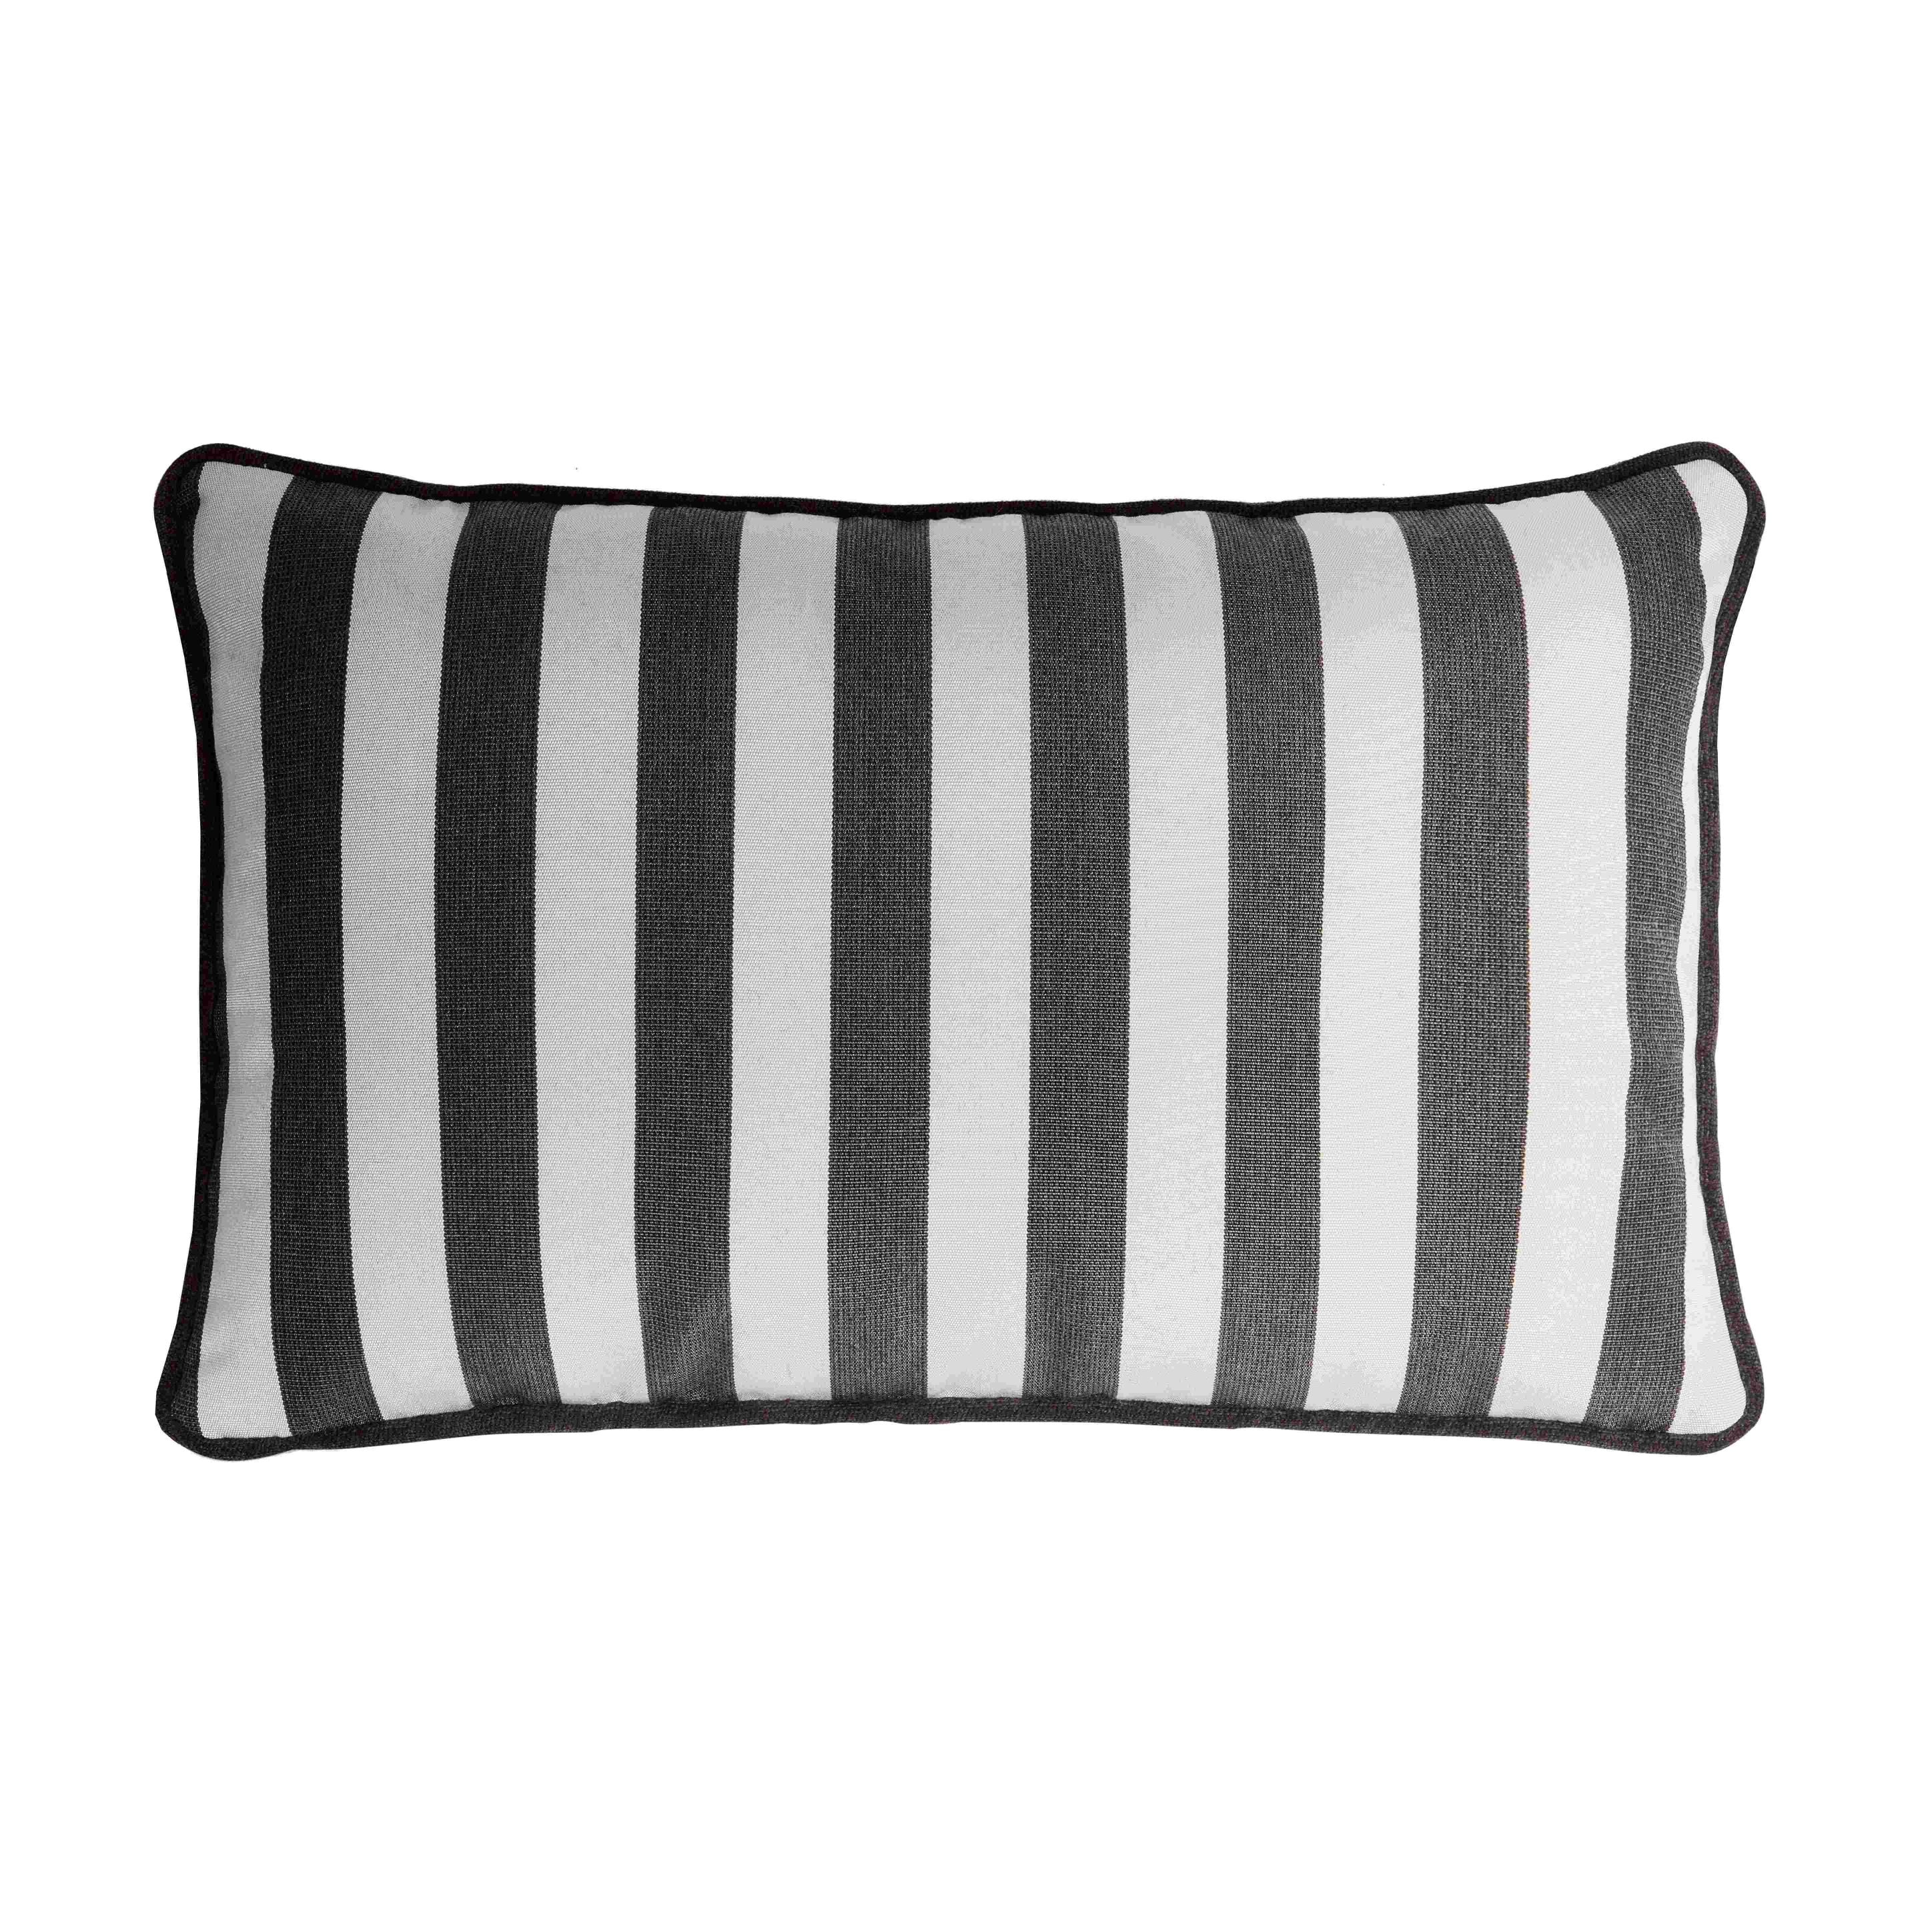 OutdoorIndoorCoupleStripedCushionsWithFringes-PipingCarbondetail2LS_9cb03b27-2d7a-4d05-93ac-34ea584eb1f8.jpg